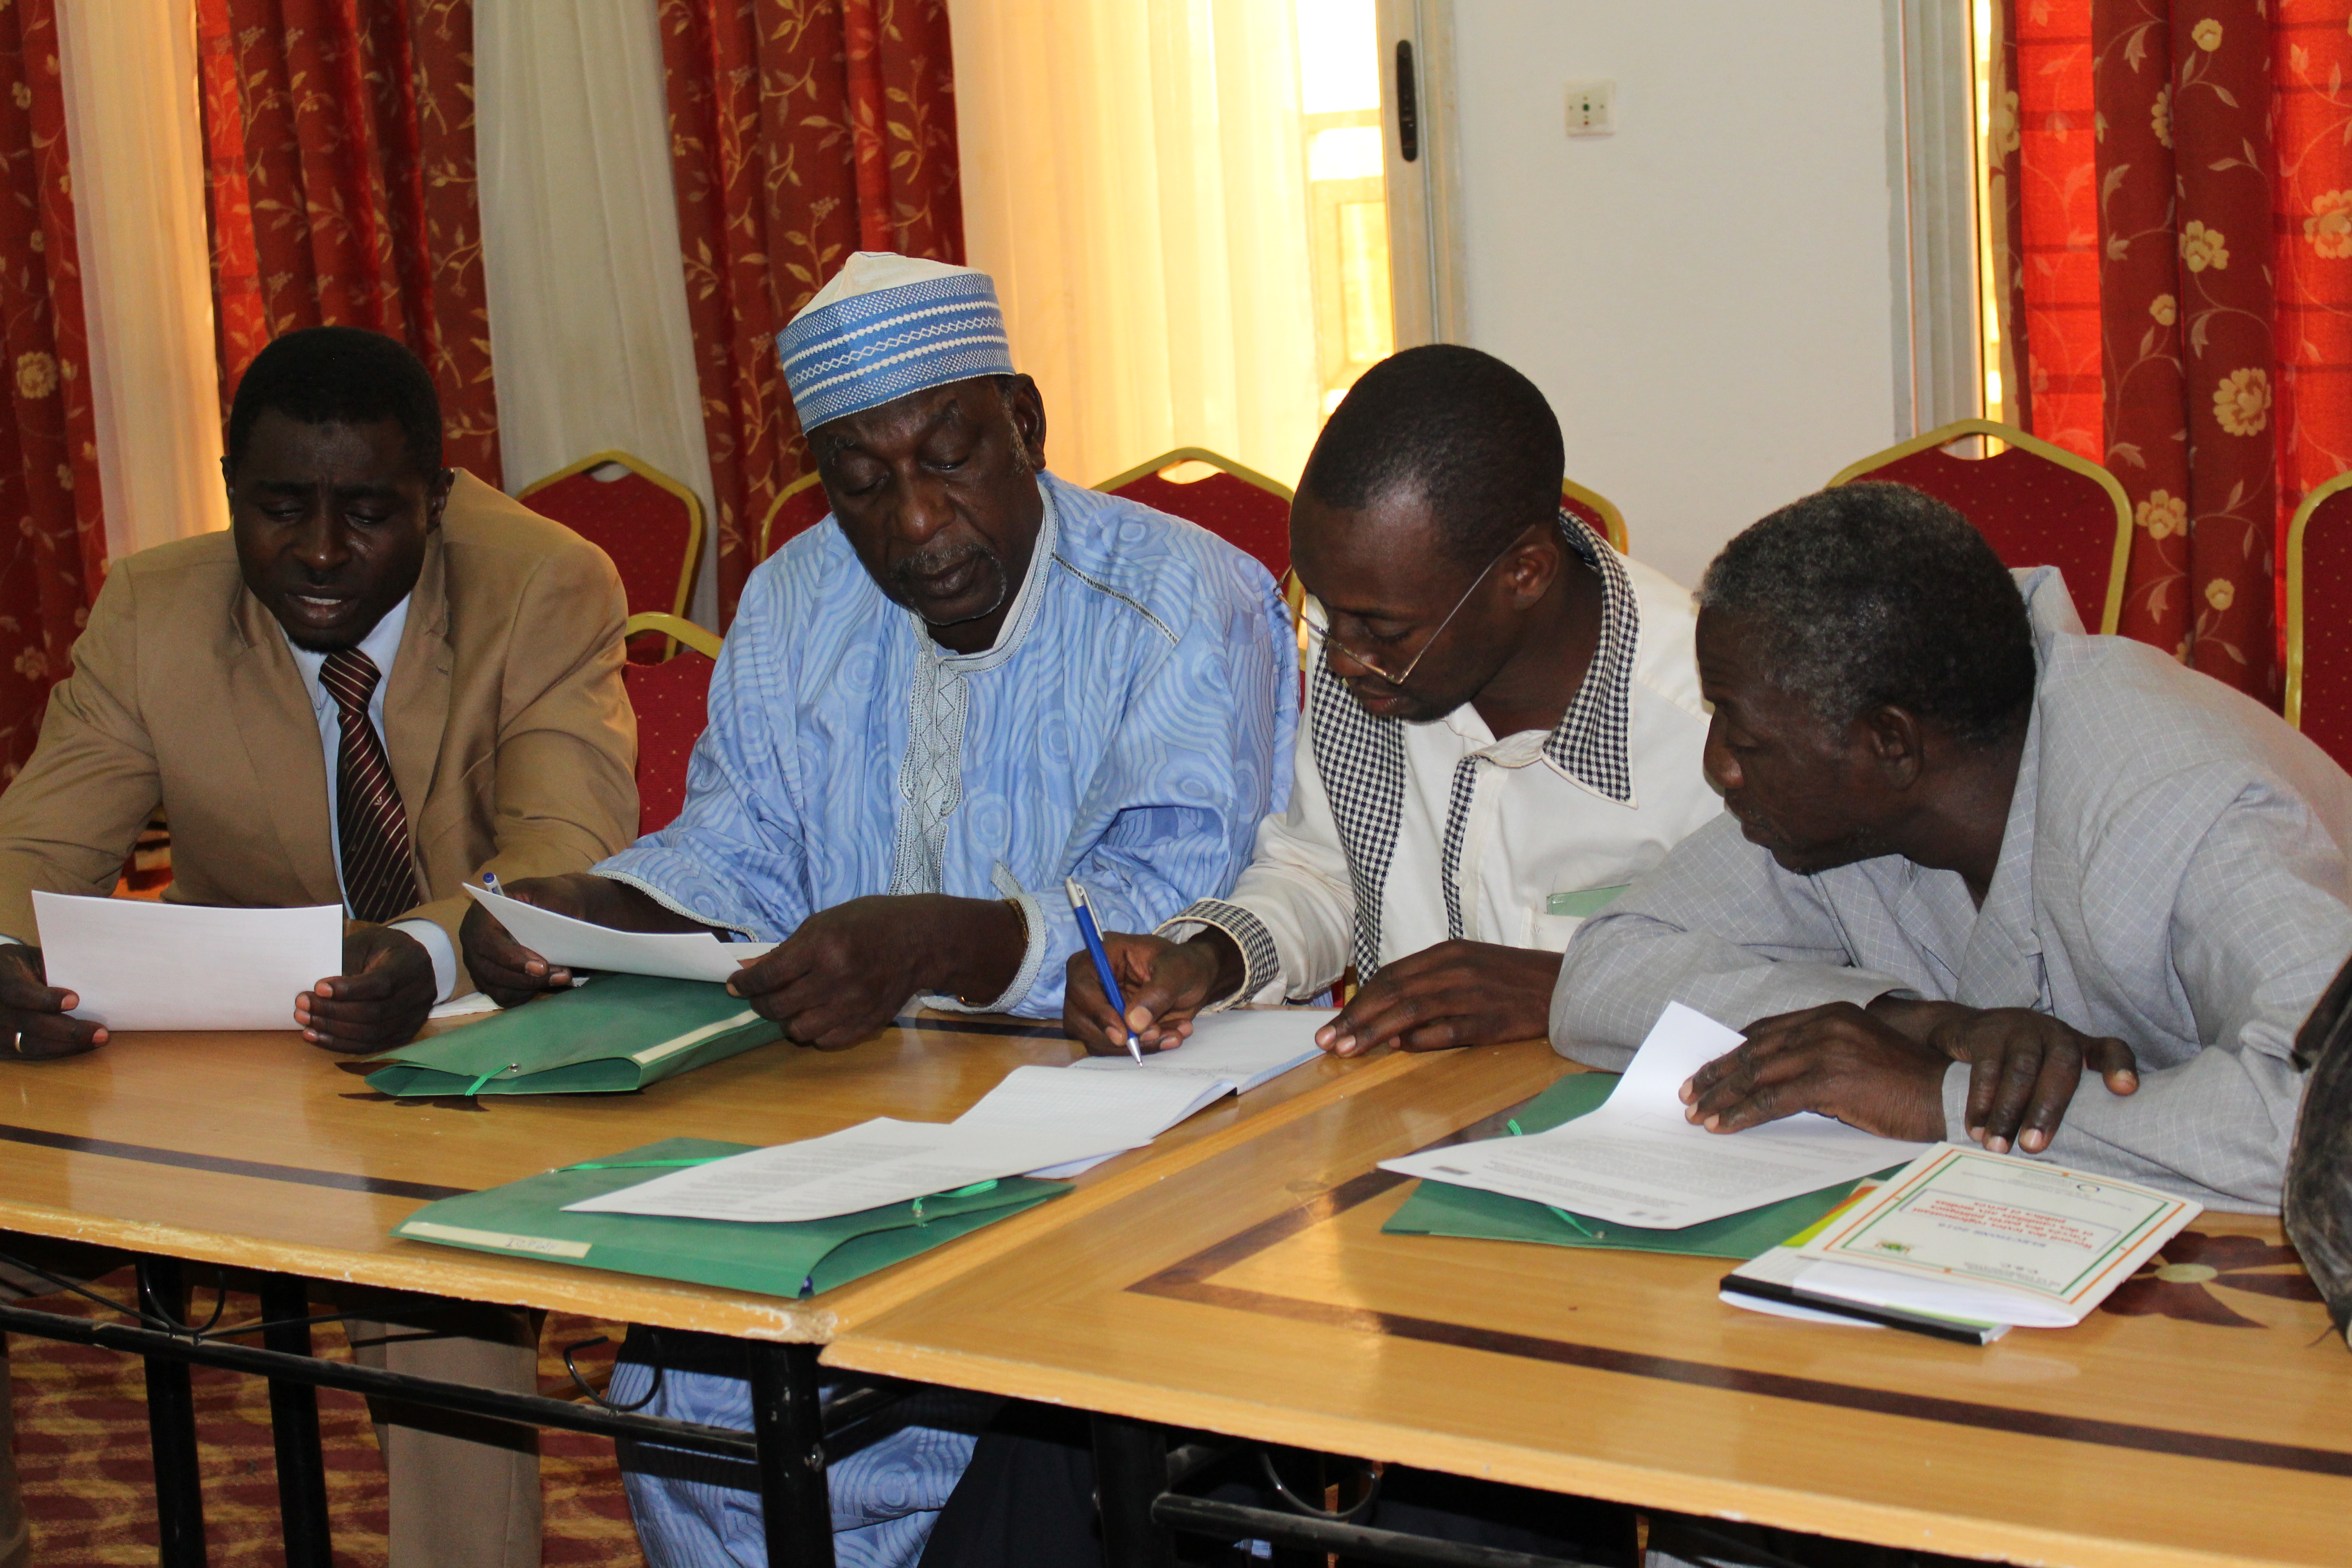 IRI partnered with the High Council of Communications to provide Nigerien political parties with the tools and resources to conduct peaceful and effective campaign messages.